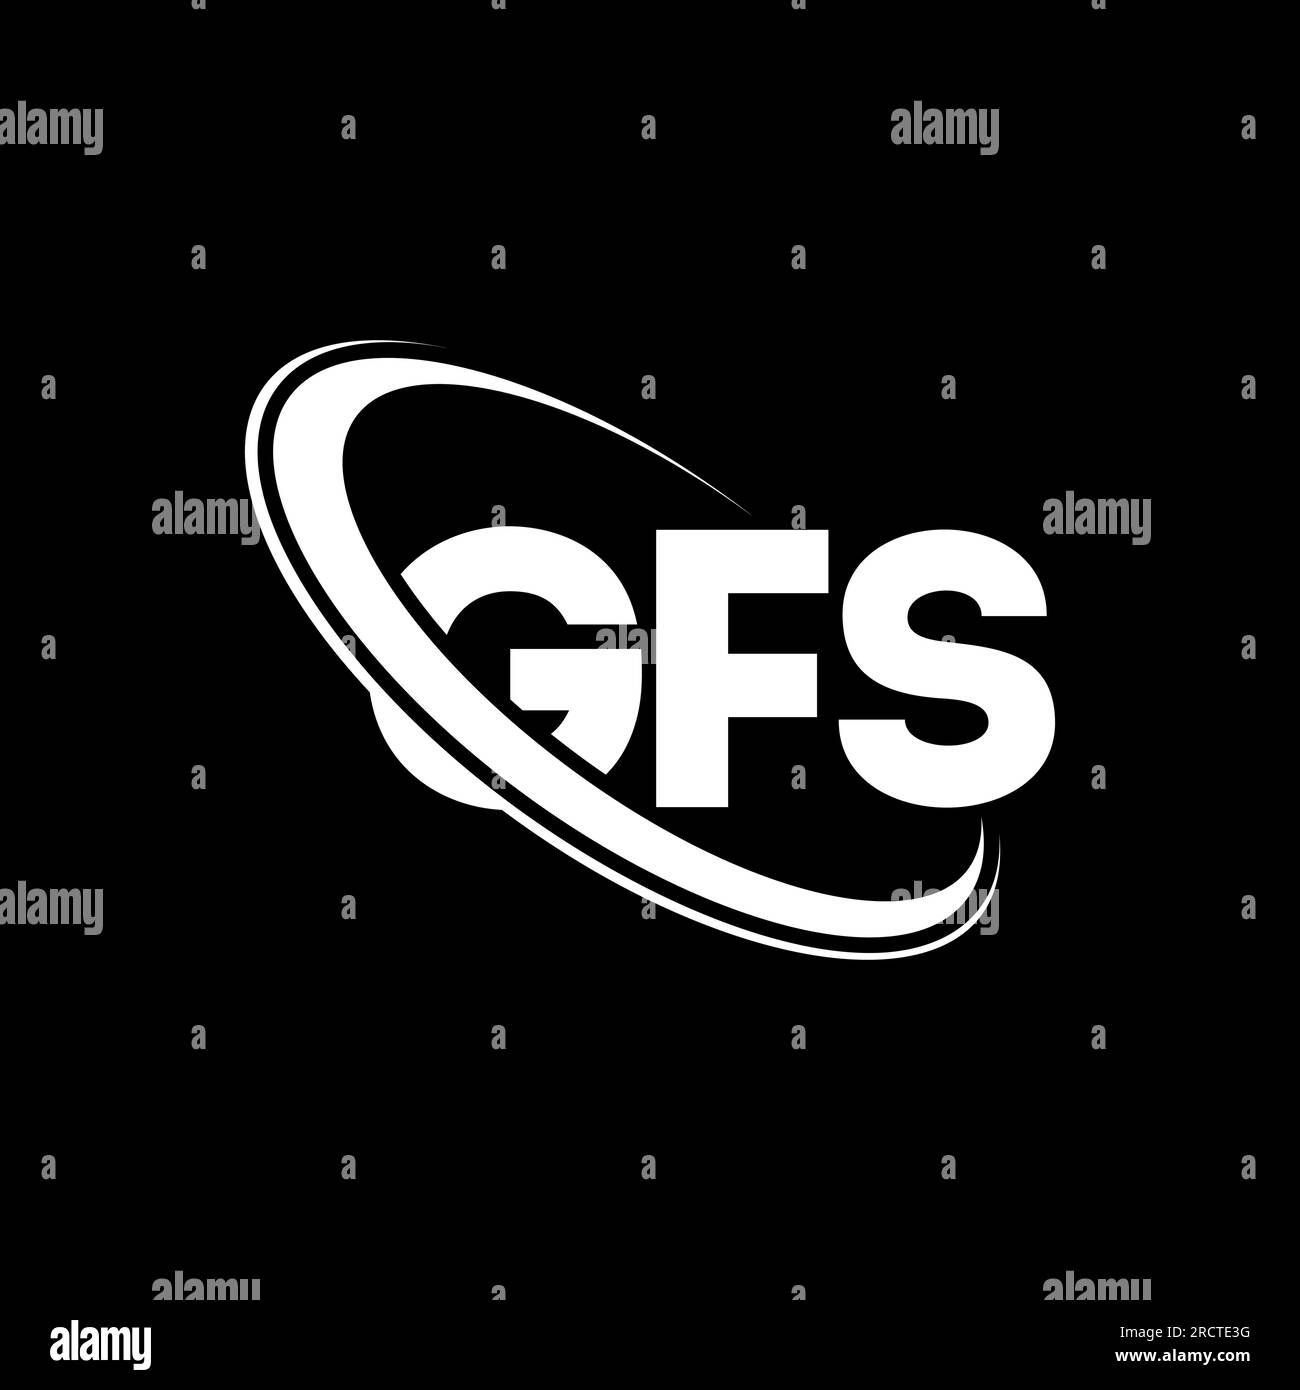 GFS logo. GFS letter. GFS letter logo design. Initials GFS logo linked with circle and uppercase monogram logo. GFS typography for technology, busines Stock Vector